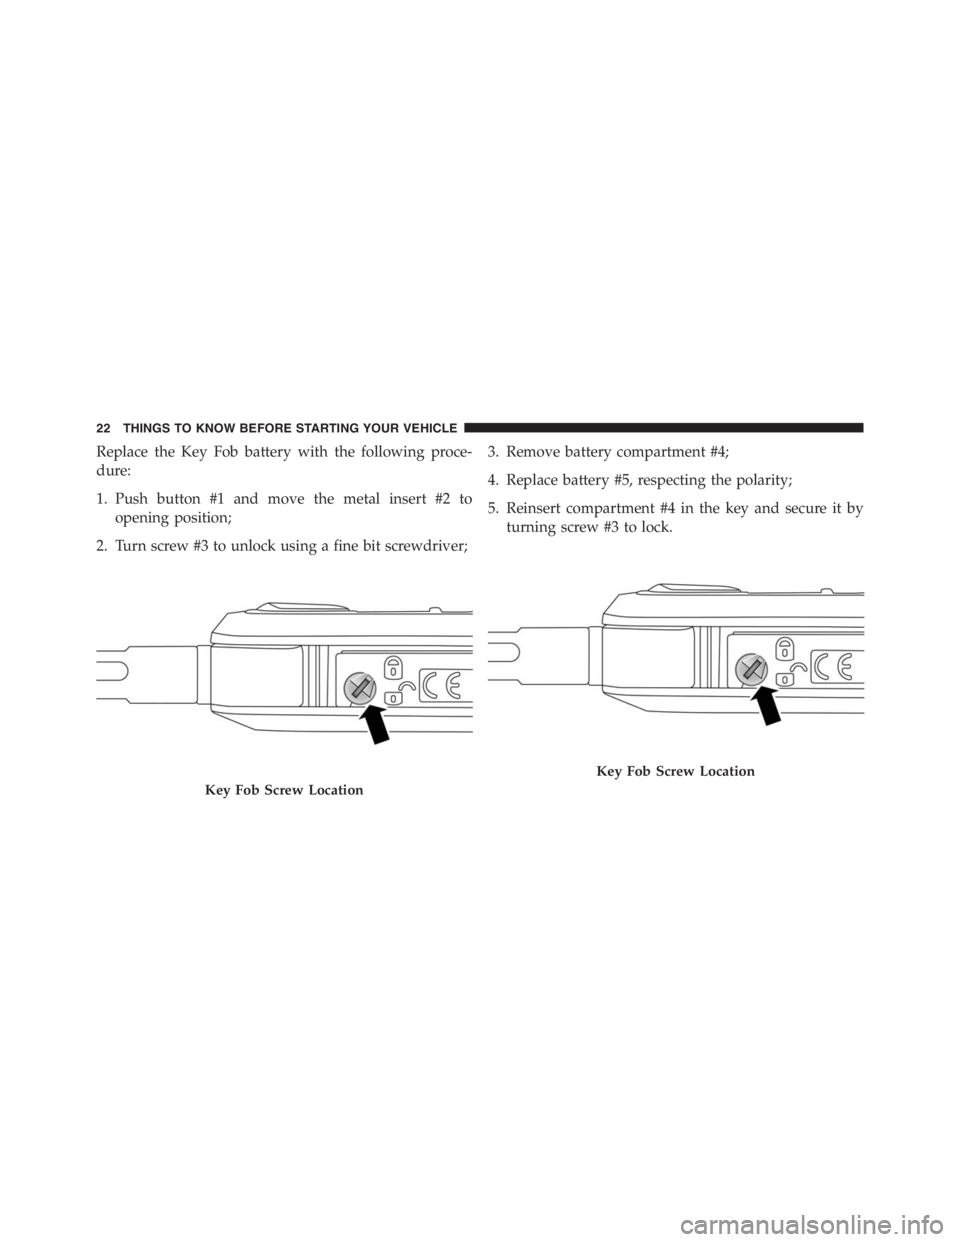 PEUGEOT 4C 2015  Owners Manual Replace the Key Fob battery with the following proce-
dure:
1. Push button #1 and move the metal insert #2 to
opening position;
2. Turn screw #3 to unlock using a fine bit screwdriver;3. Remove batter